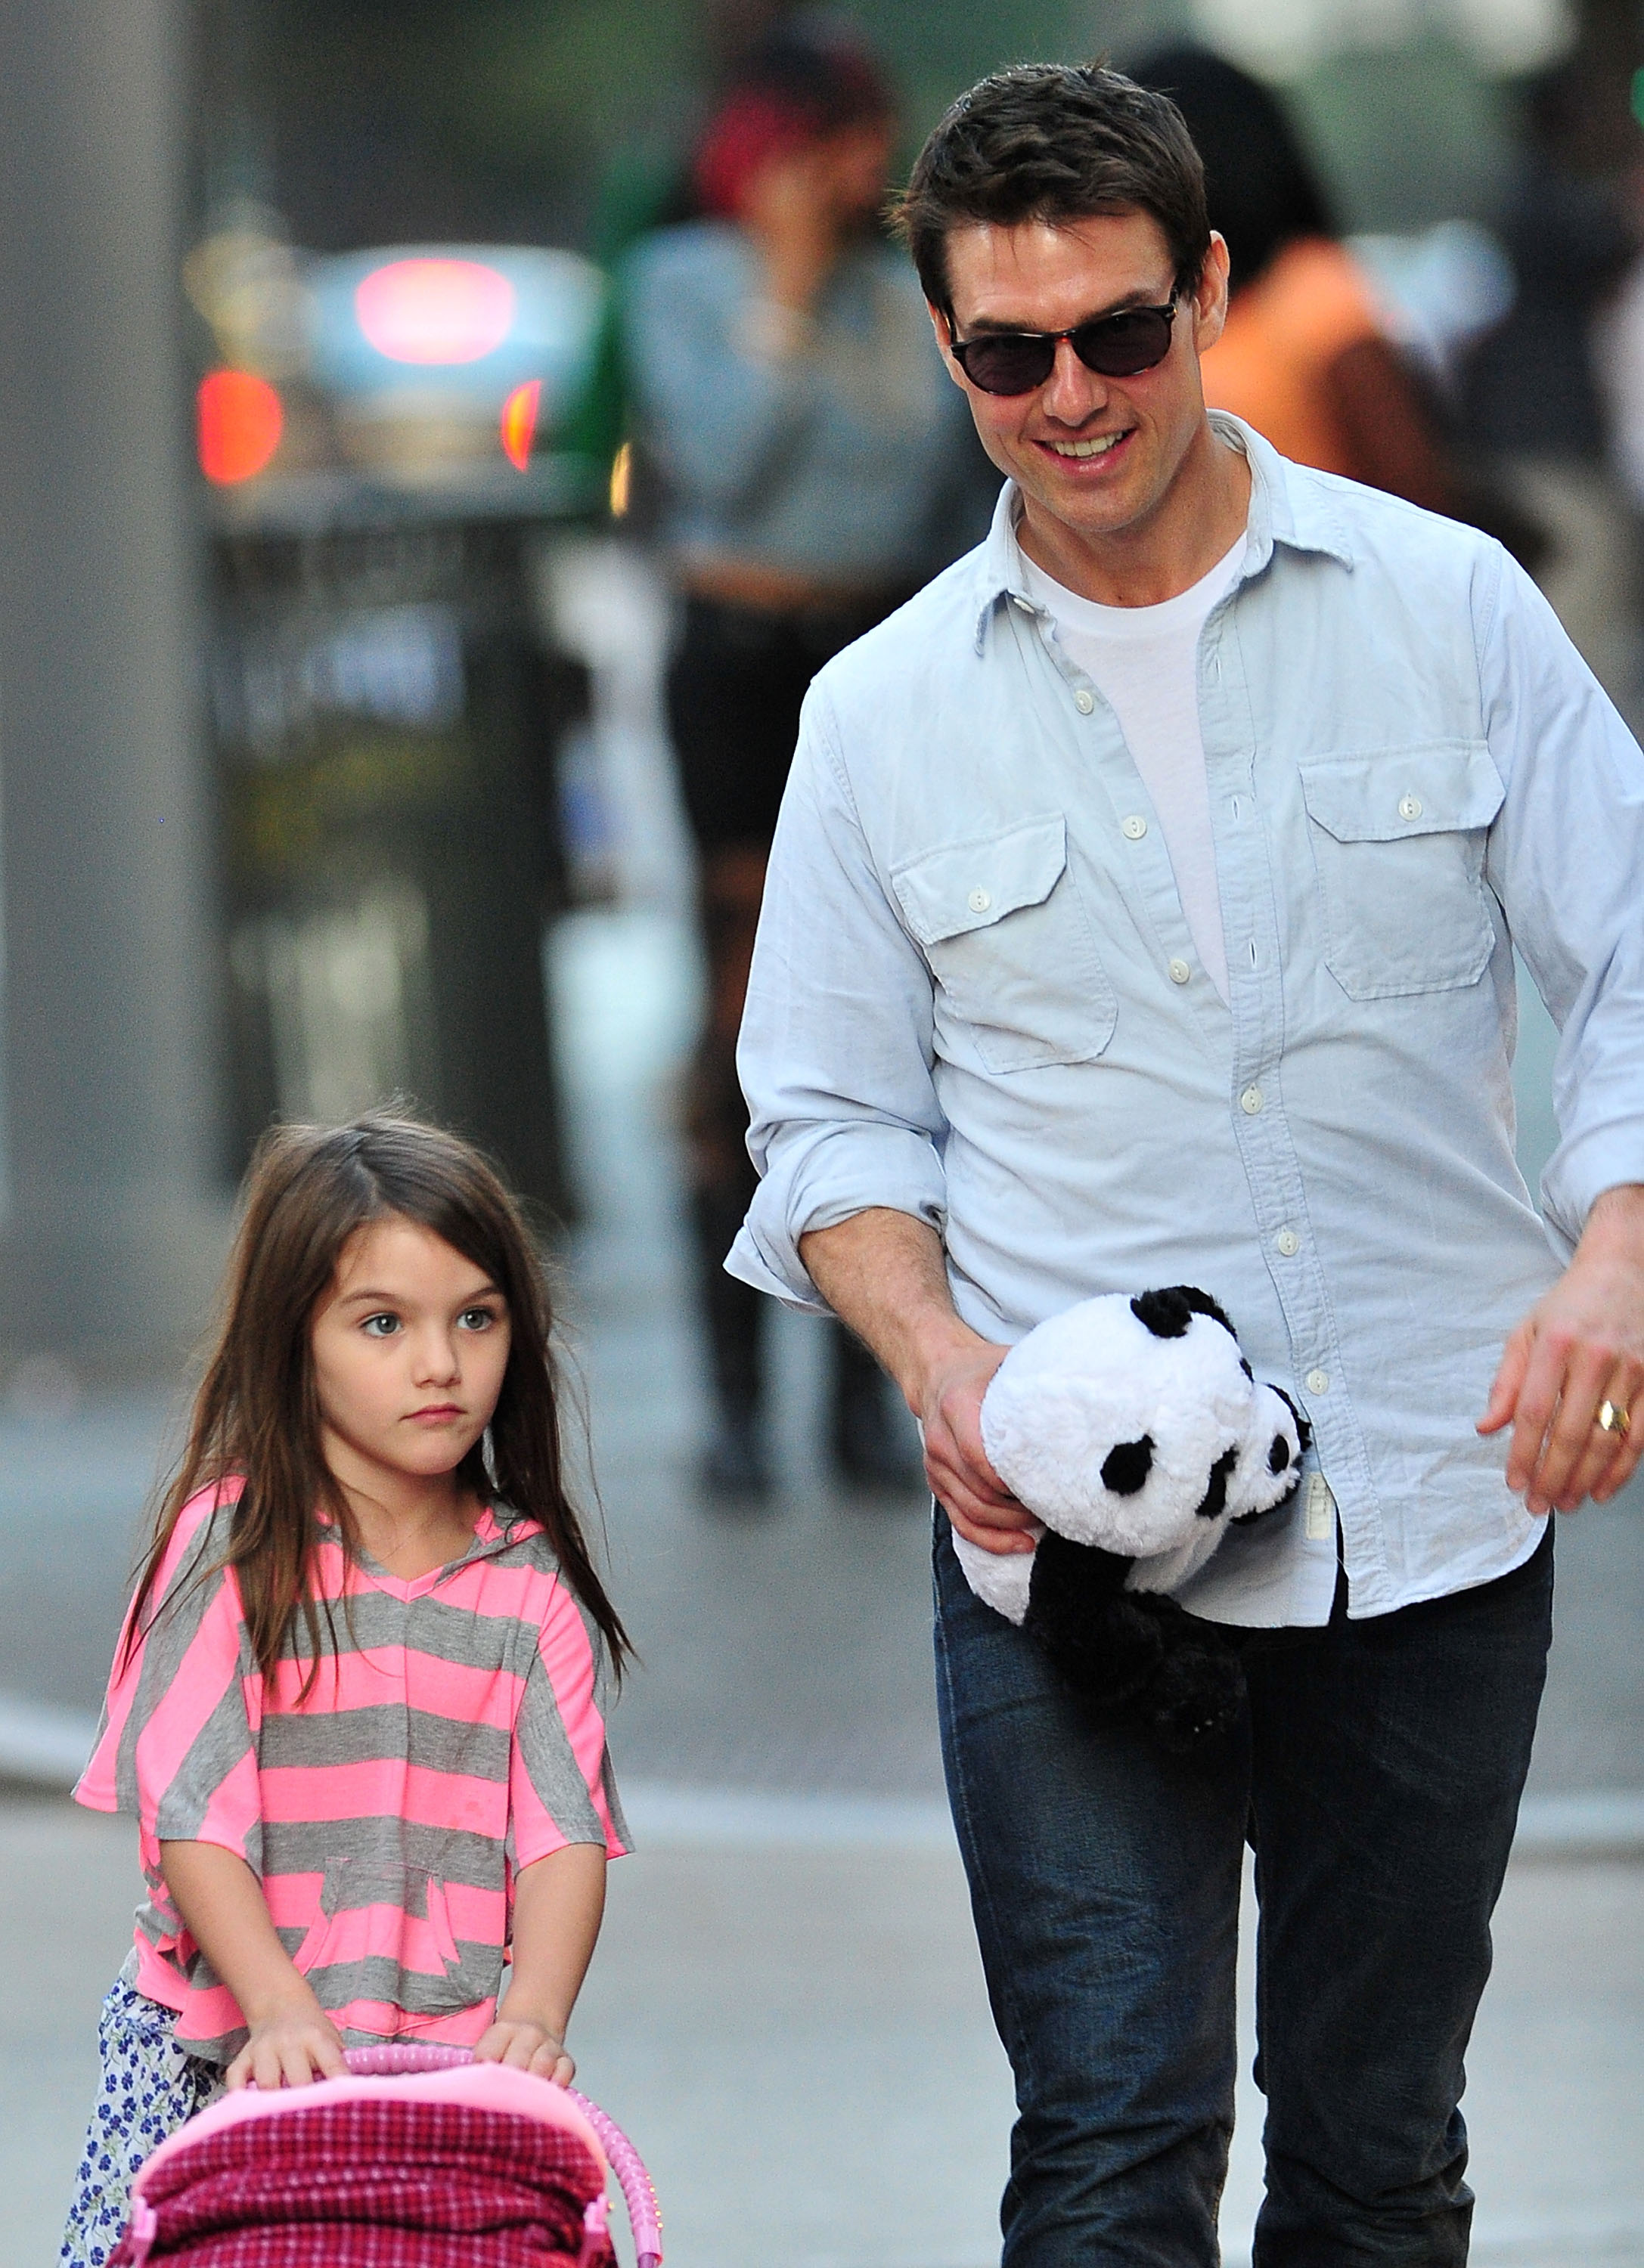 Suri Cruise and Tom Cruise seen on the streets in Pittsburgh, Pennsylvania, on October 8, 2011. | Source: Getty Images